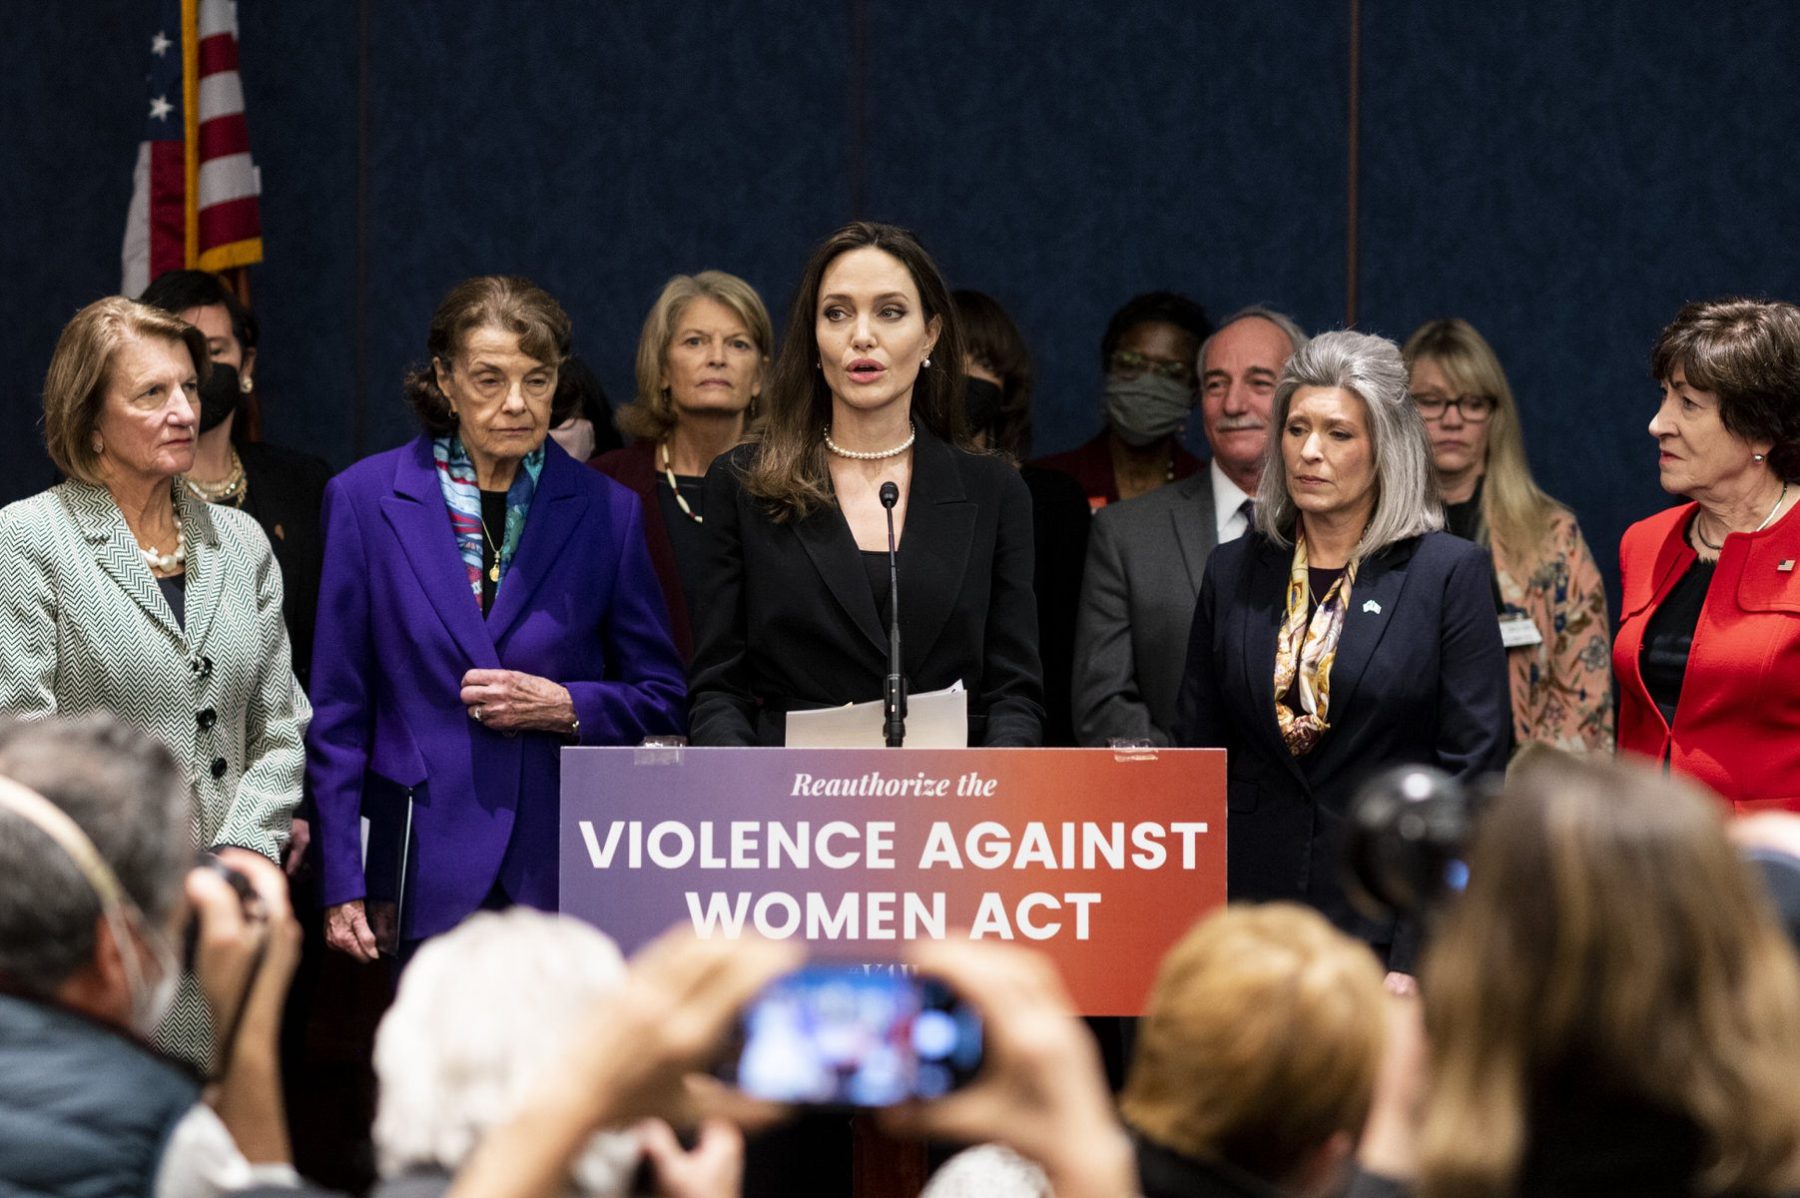 Angelina Jolie stands with women senators at a lectern that says "Violence Against Women Act"